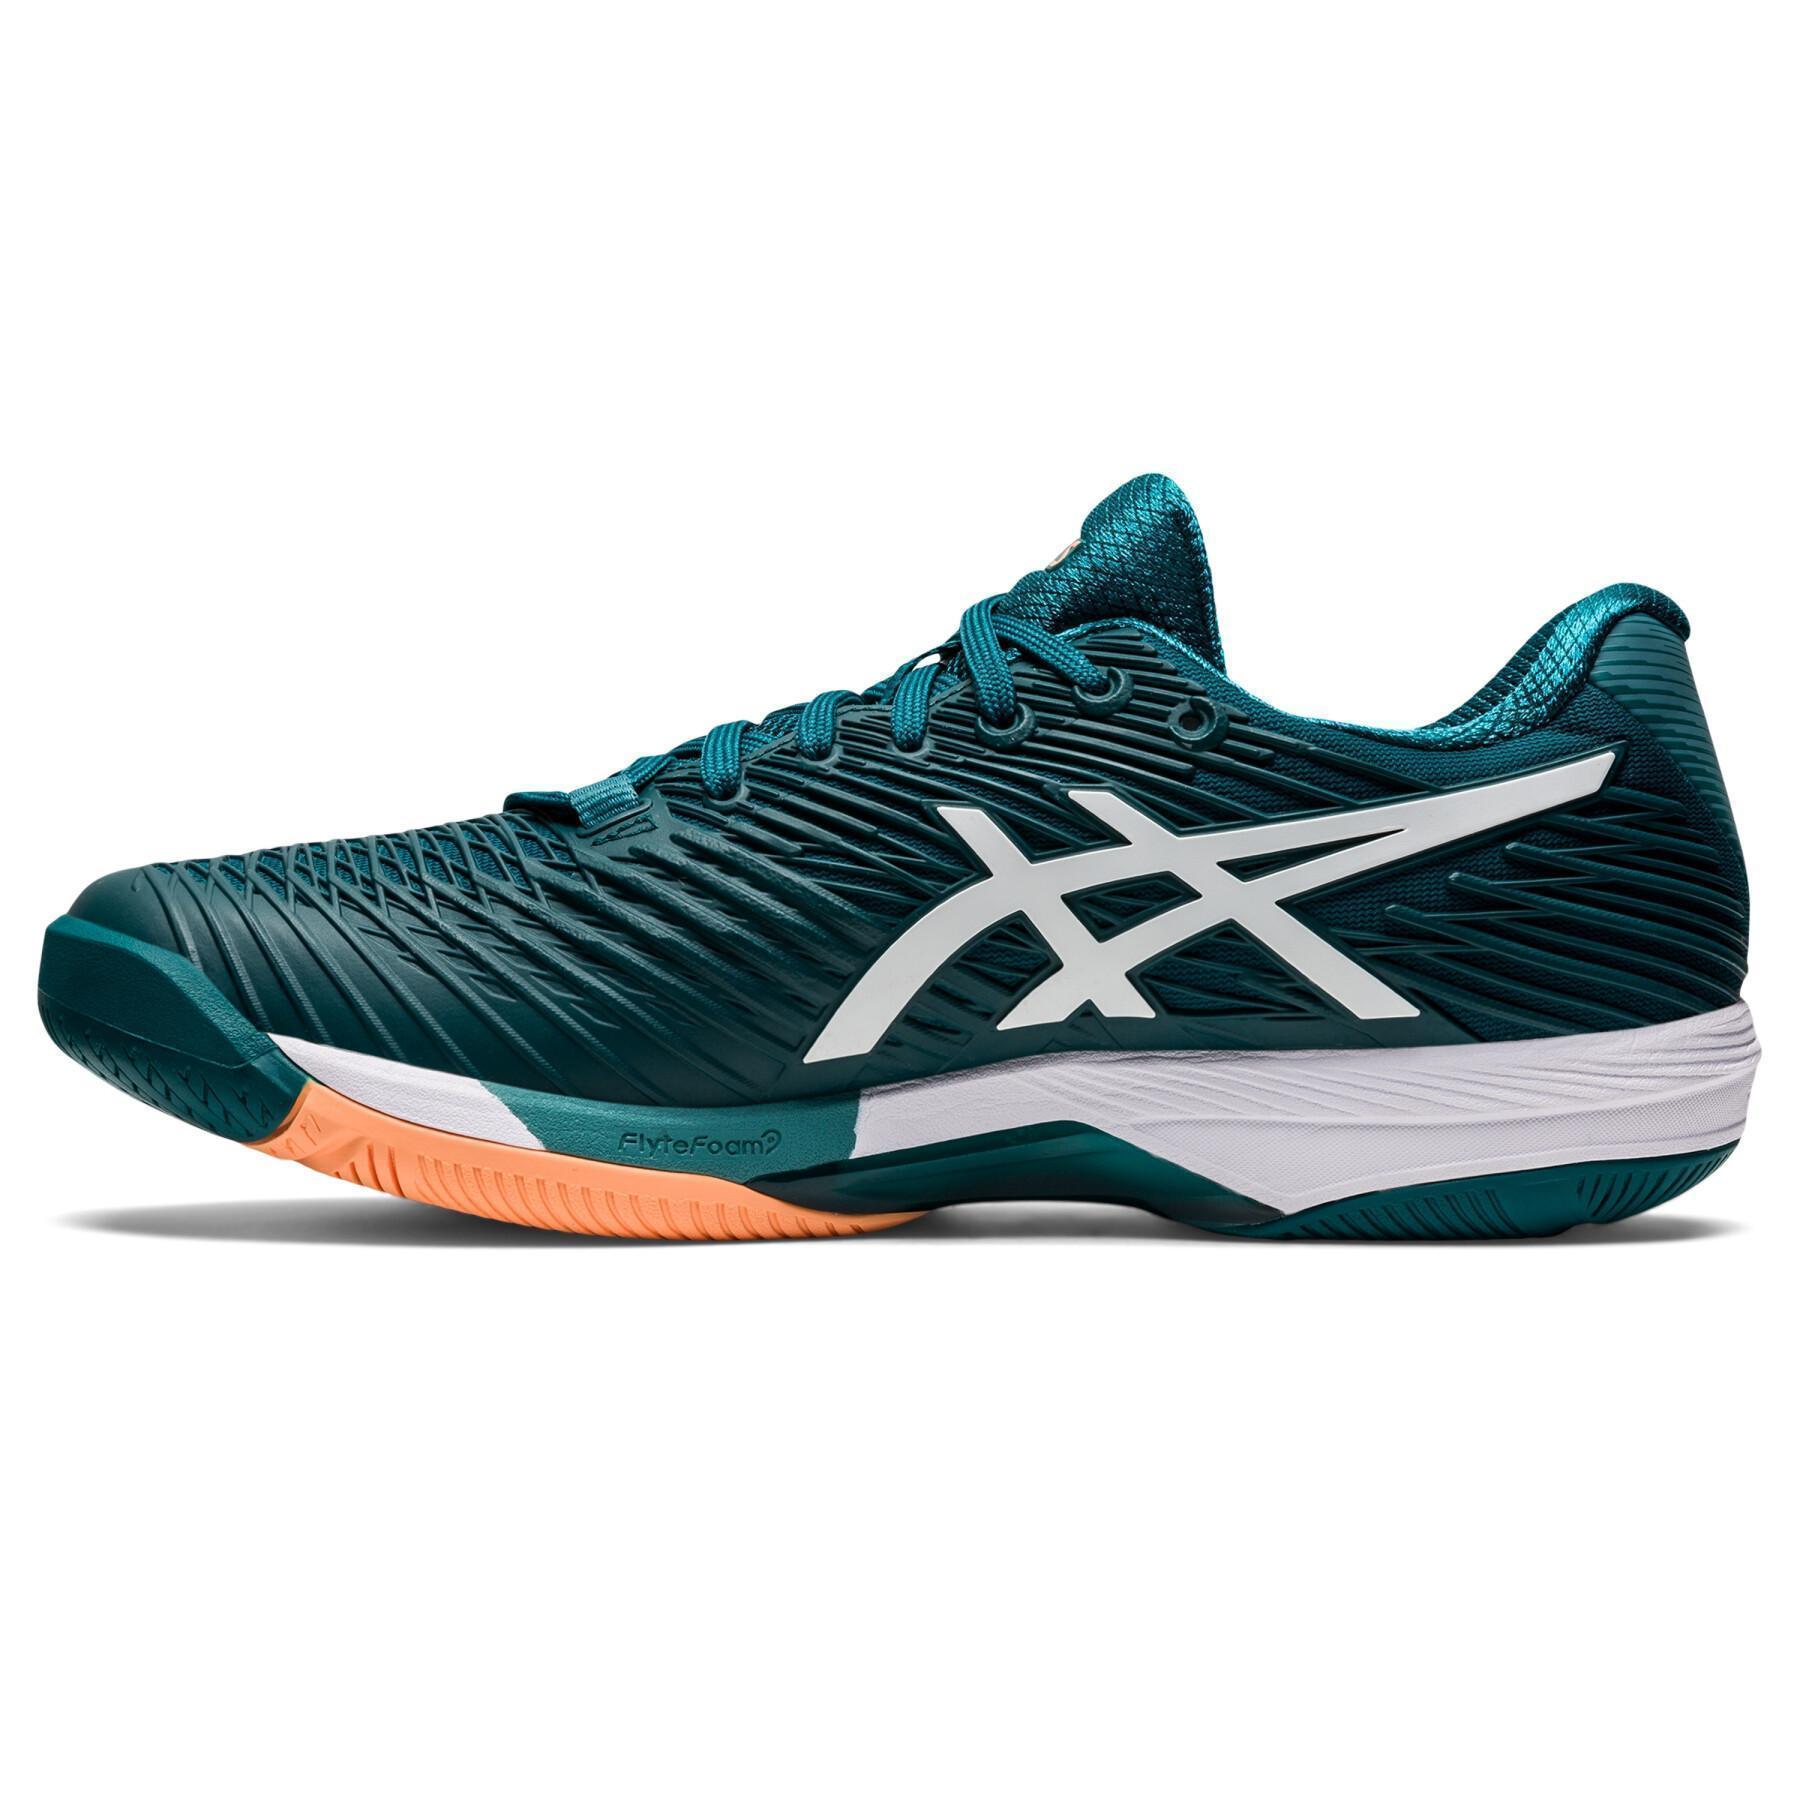 Tennis shoes Asics Solution speed FF 2